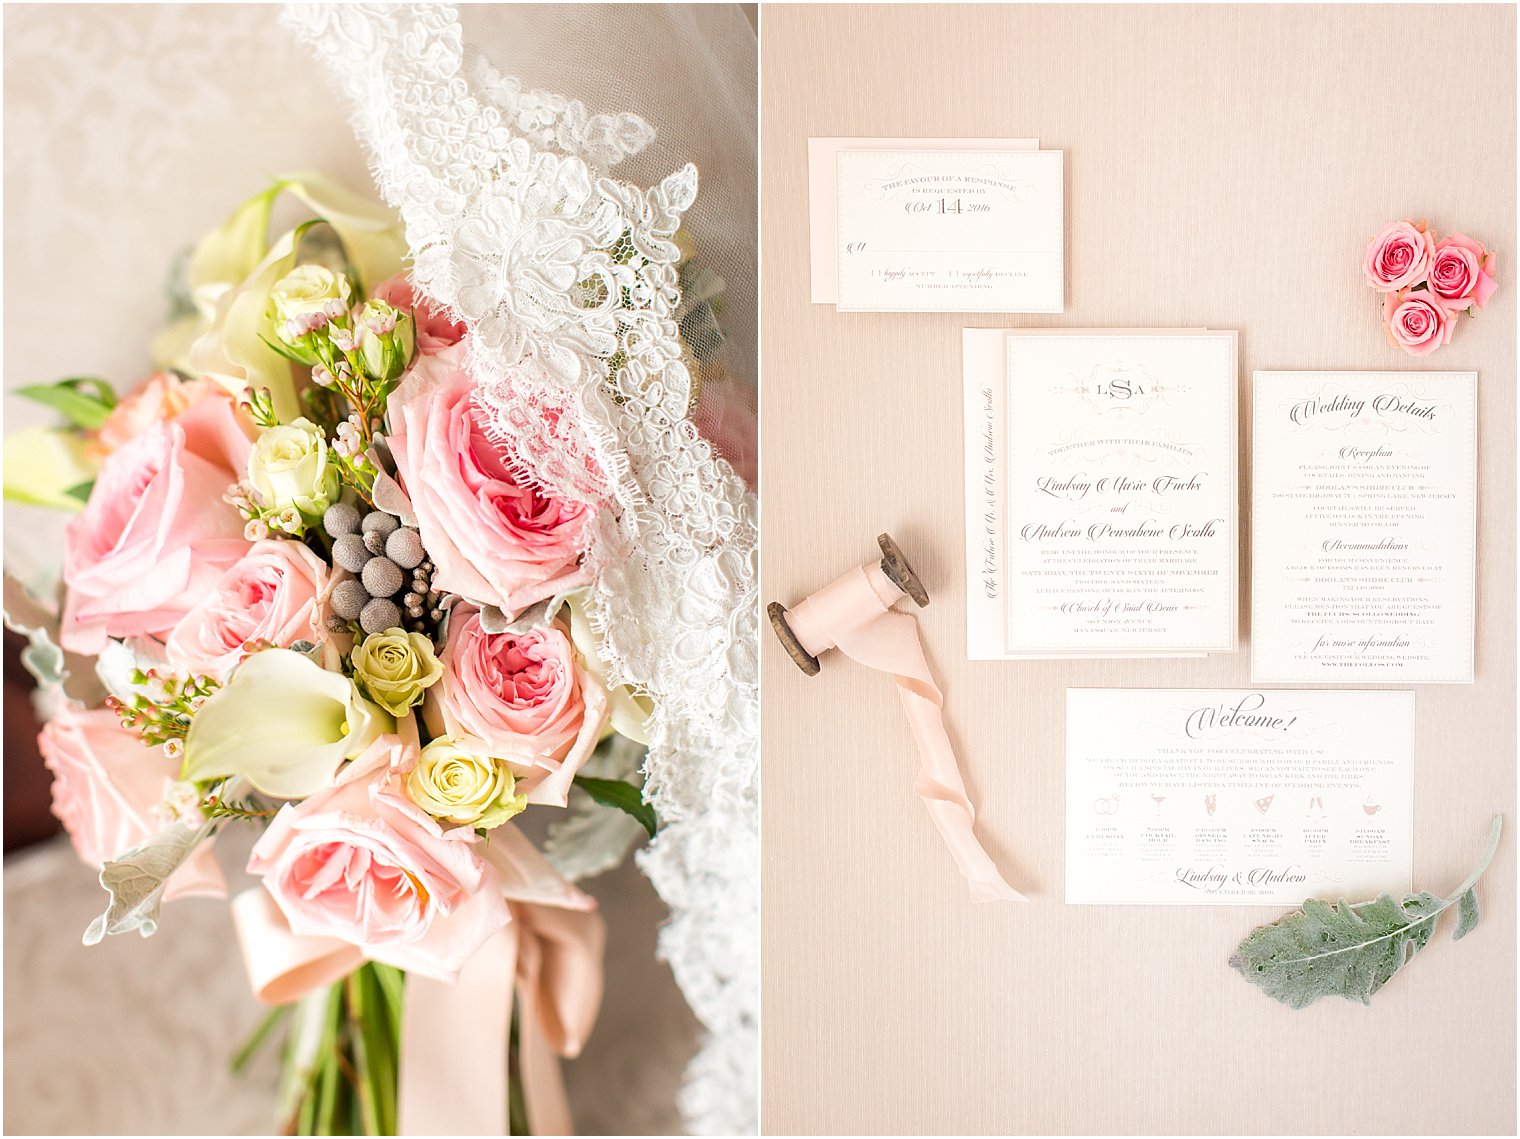 Bouquet by Bogath Weddings and Events | Invitation by Holland Designs